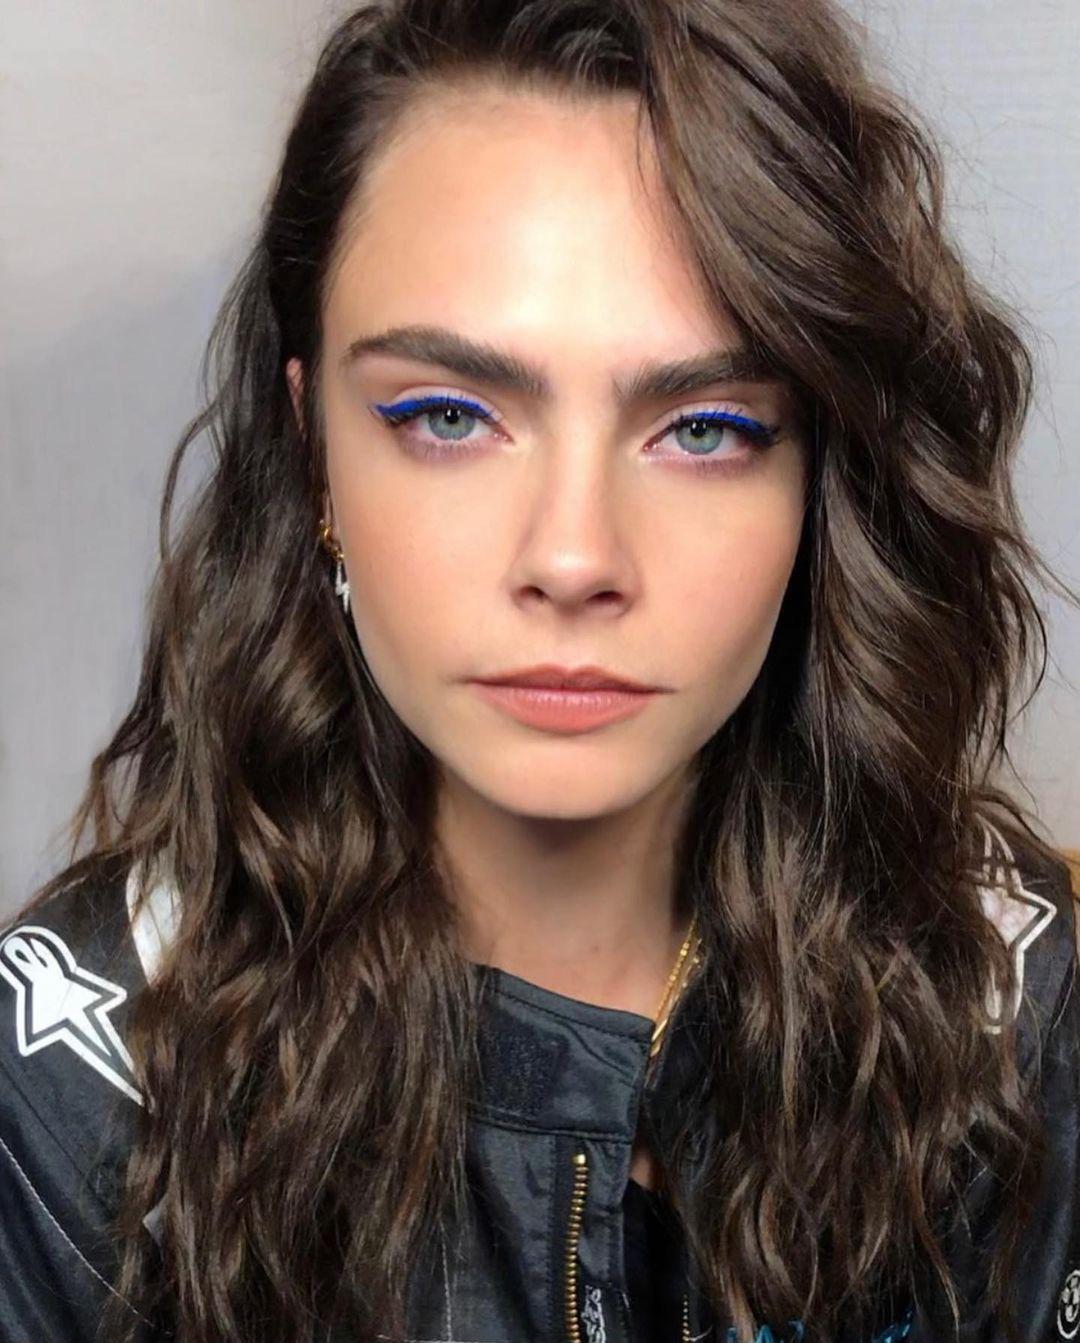 I'd love to shoot ropes on Cara Delevingne's face.